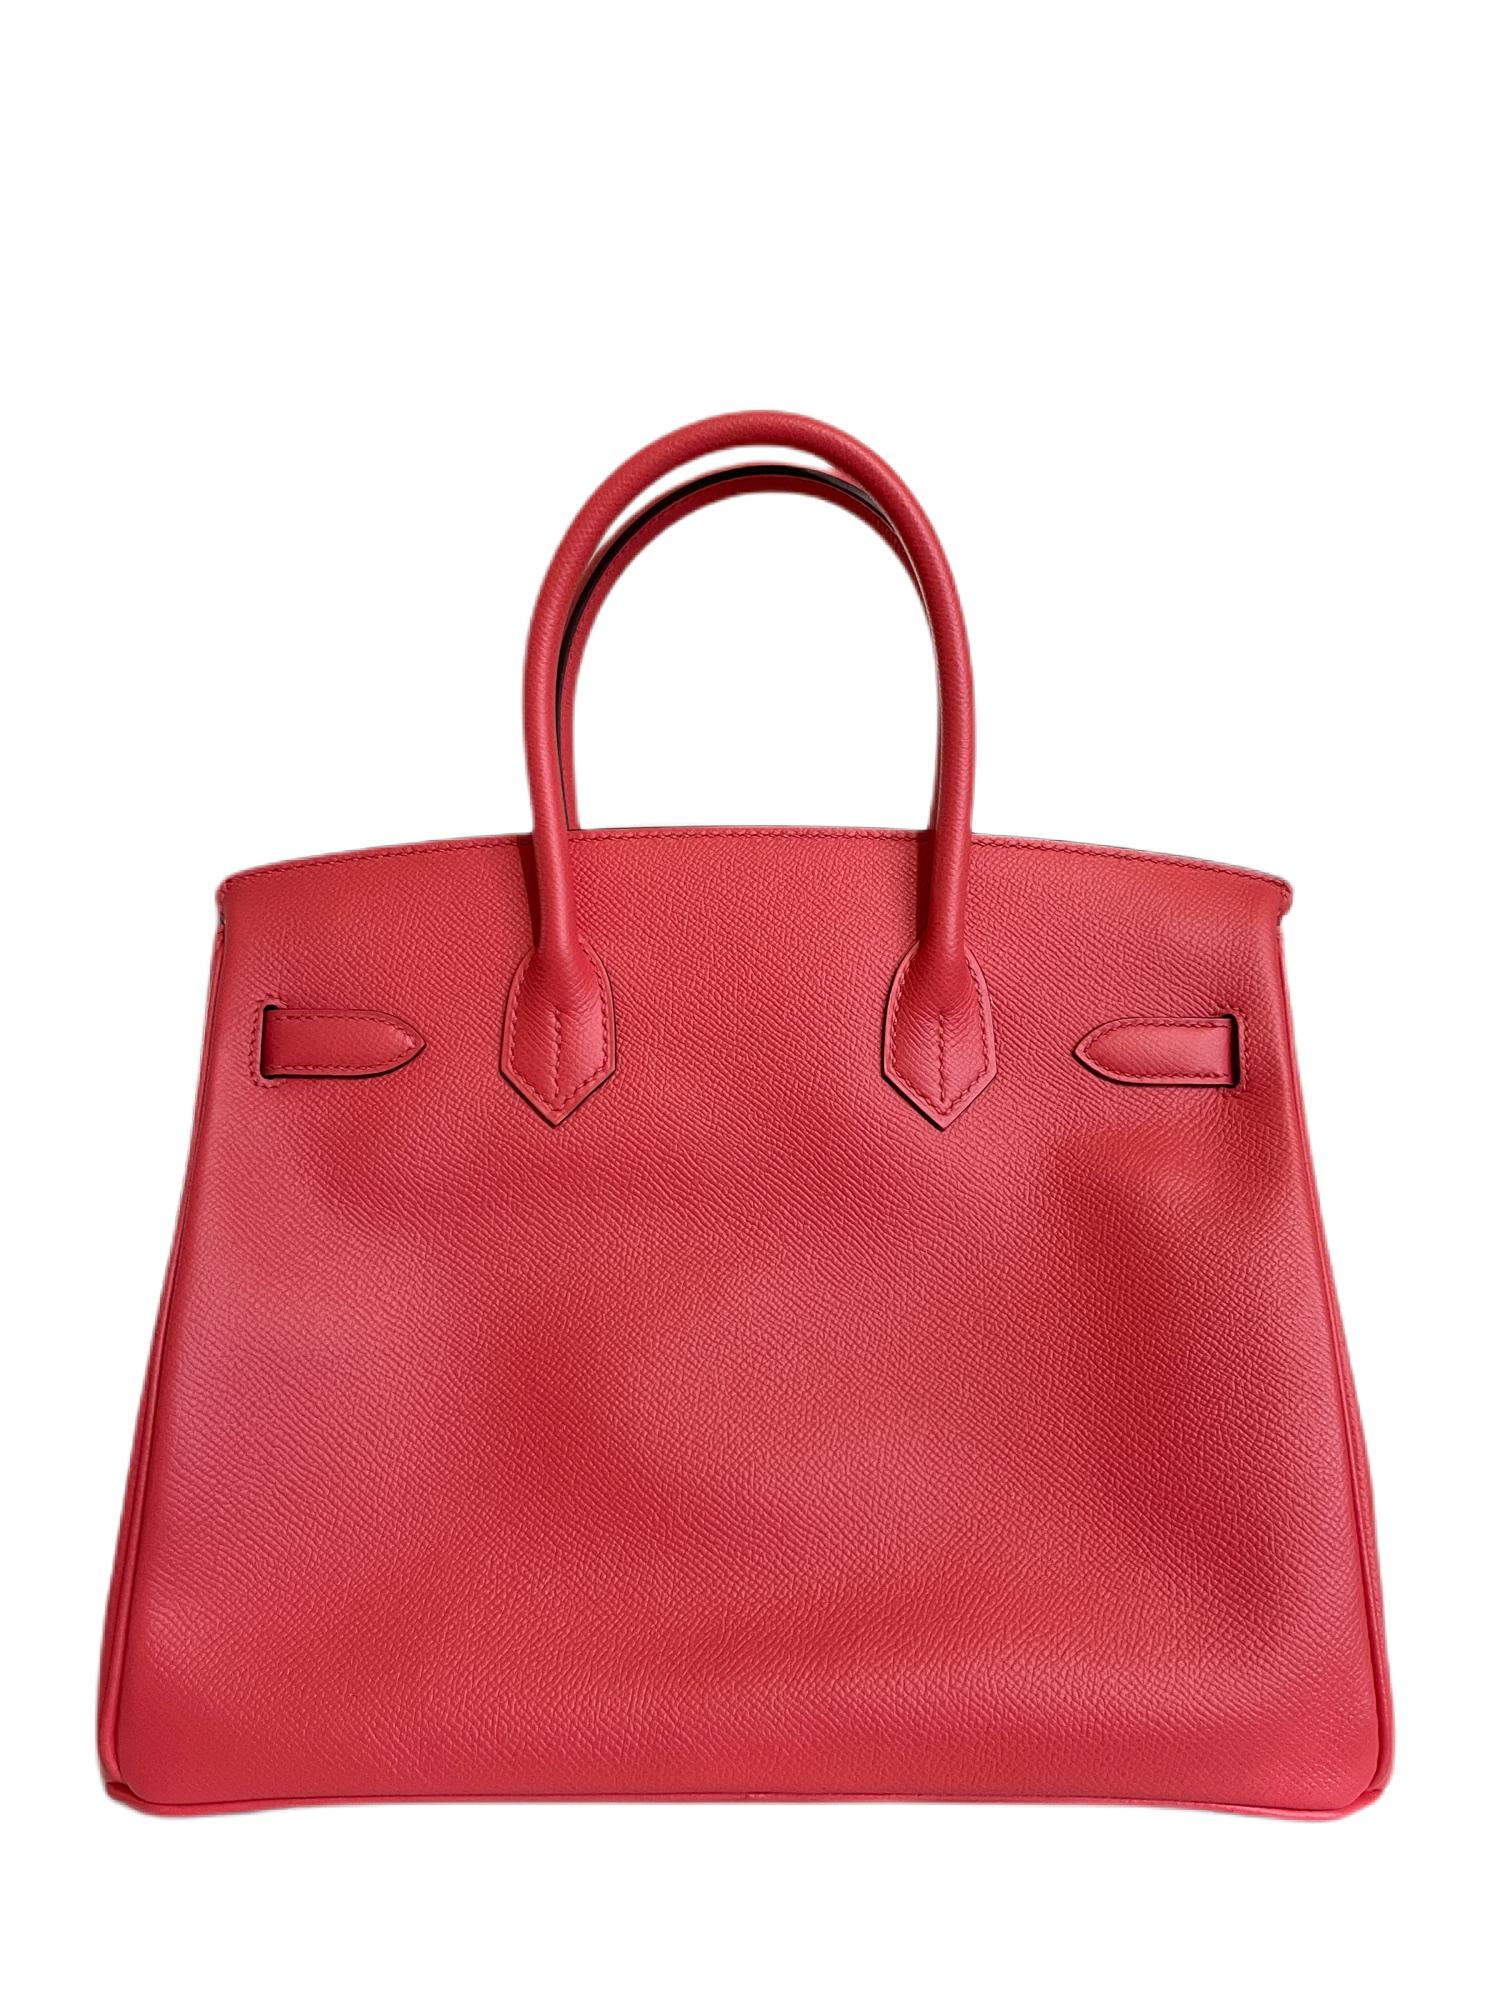 This authentic Hermès Rose Red 30 cm Epsom Birkin is pristine with the protective plastic intact on the hardware.  The elusive Birkin is made by hand and often requires extensive waitlists.  
Vibrant rose red has blue undertones and is perfectly